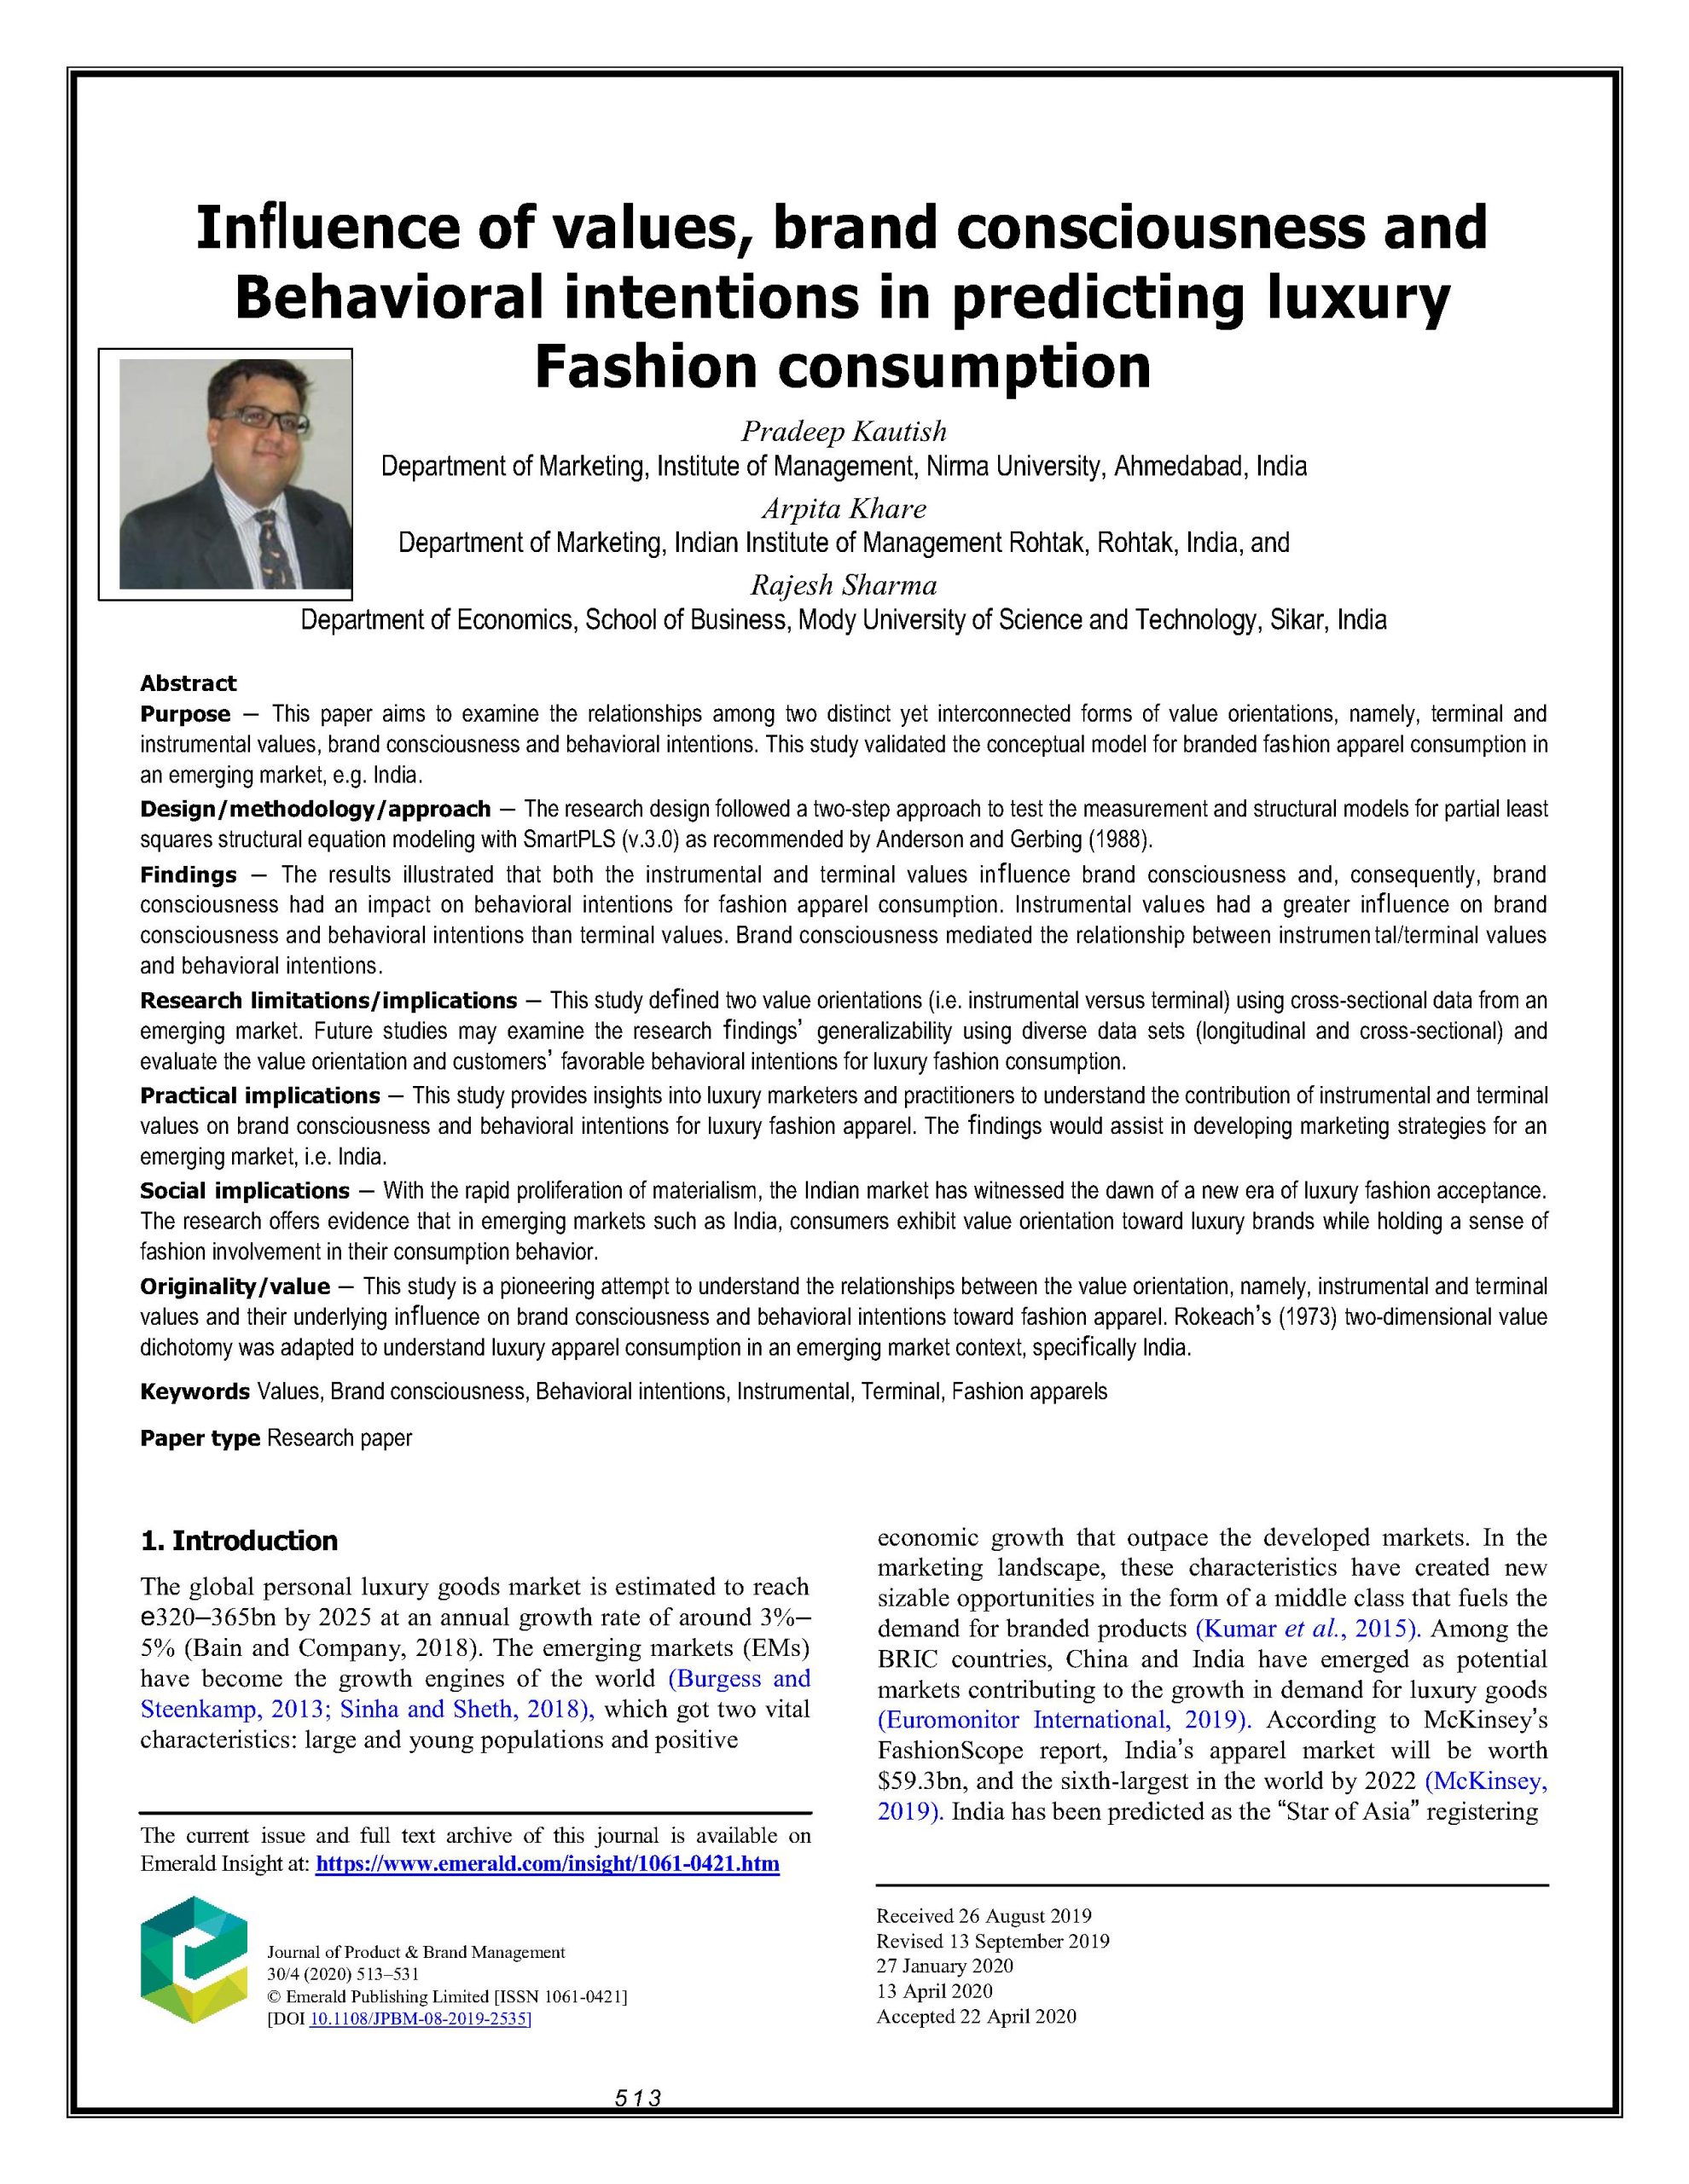 Influence of Values, Brand Consciousness and Behavioral Intentions in Predicting Luxury Fashion Consumption